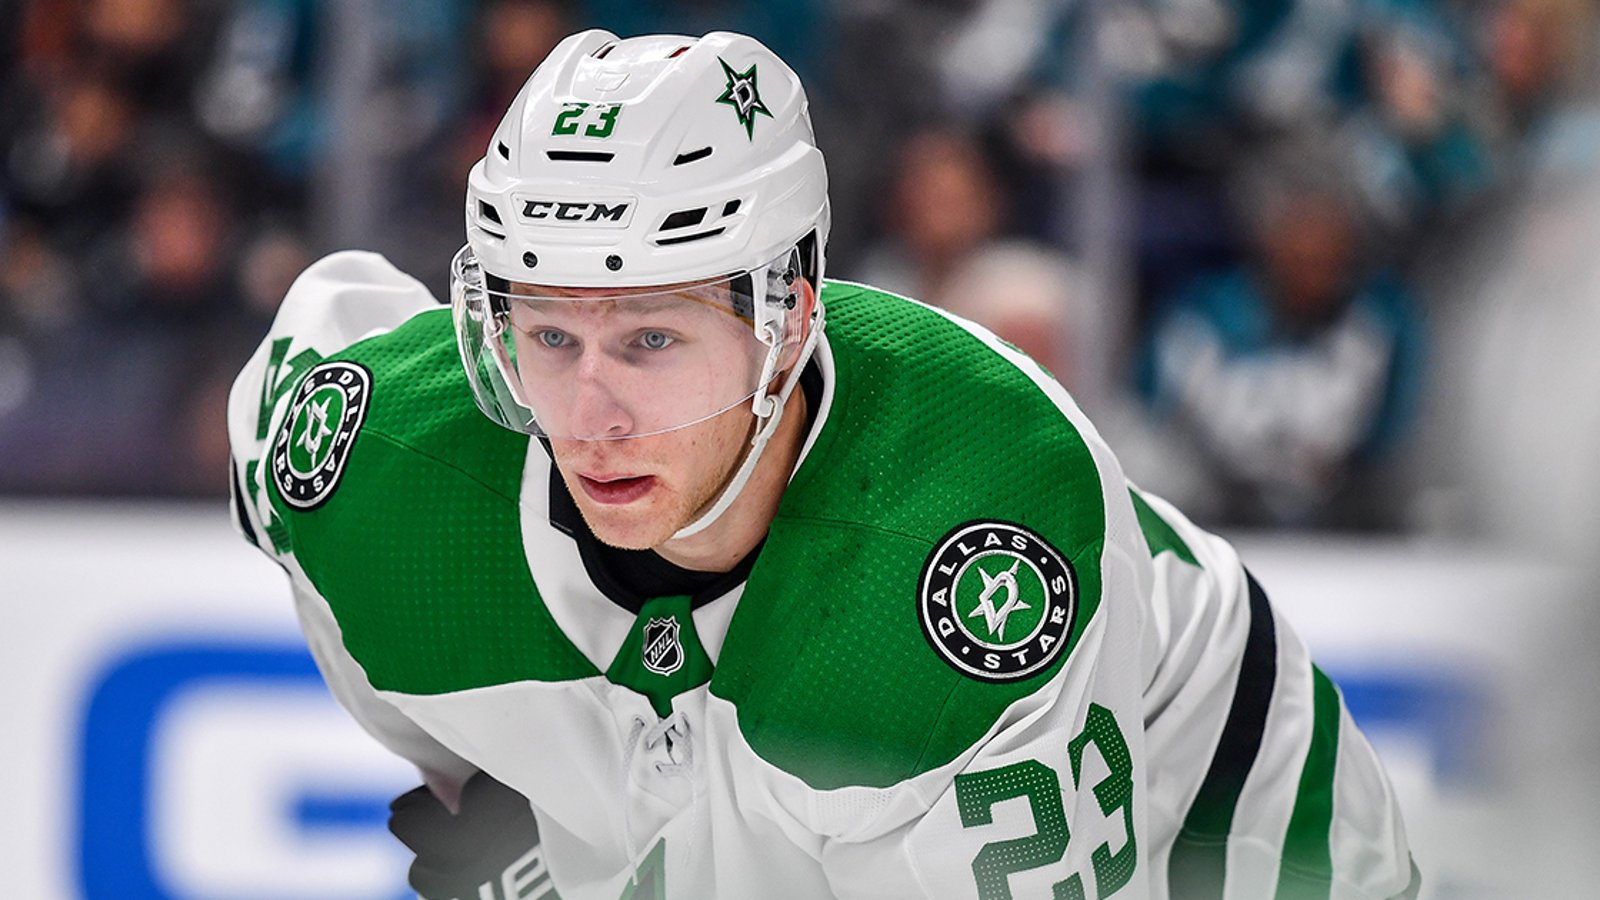 Breaking: Stars sign Lindell to new long-term contract